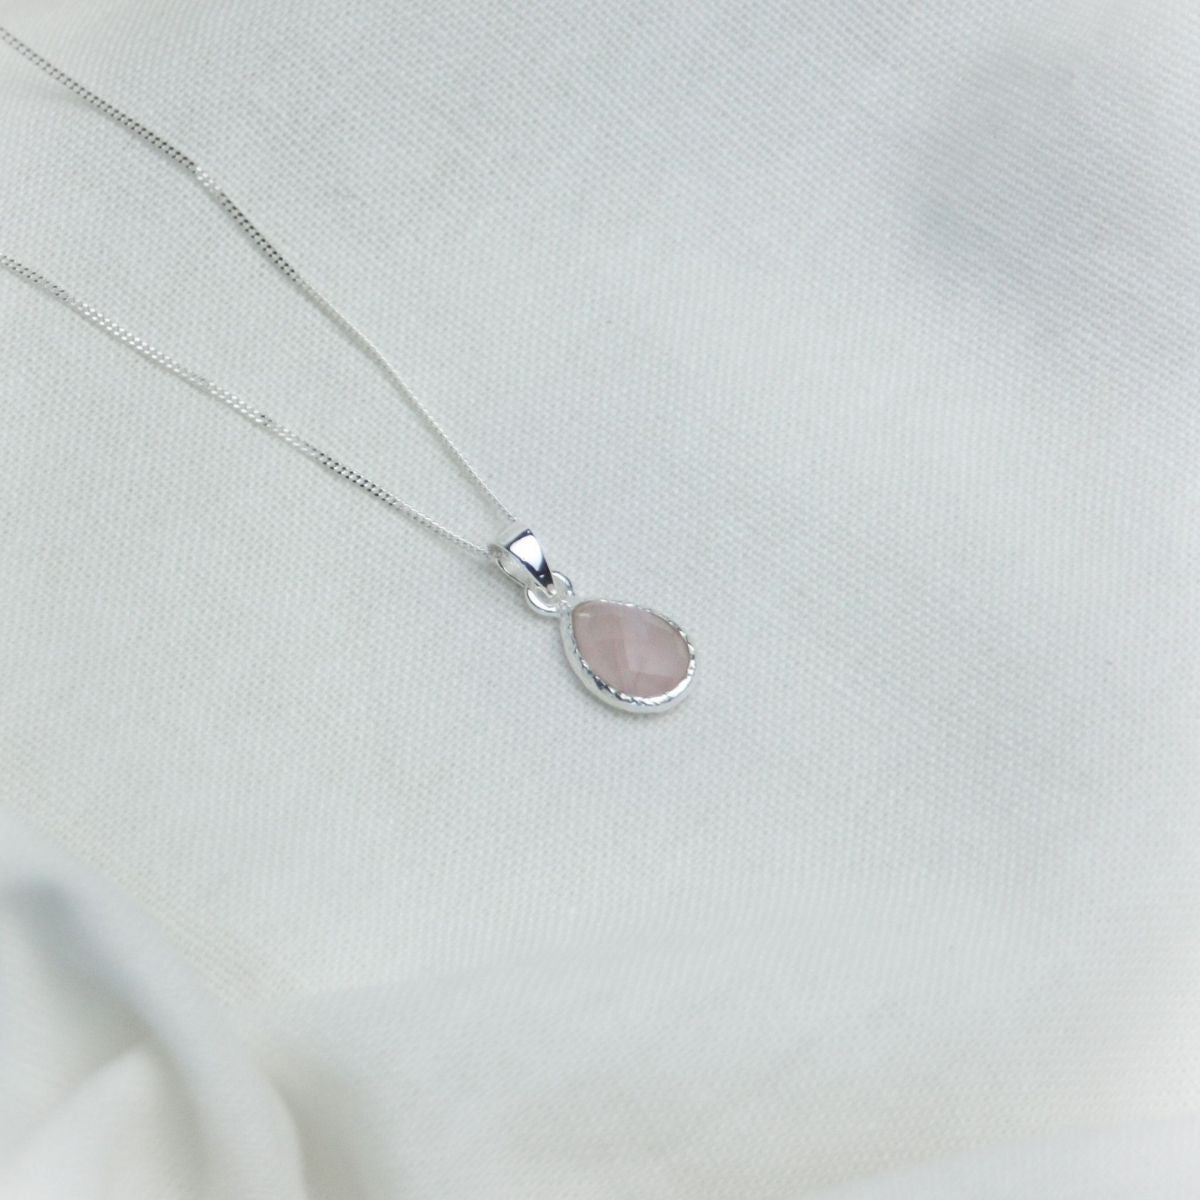 a pink pendant necklace on a white cloth